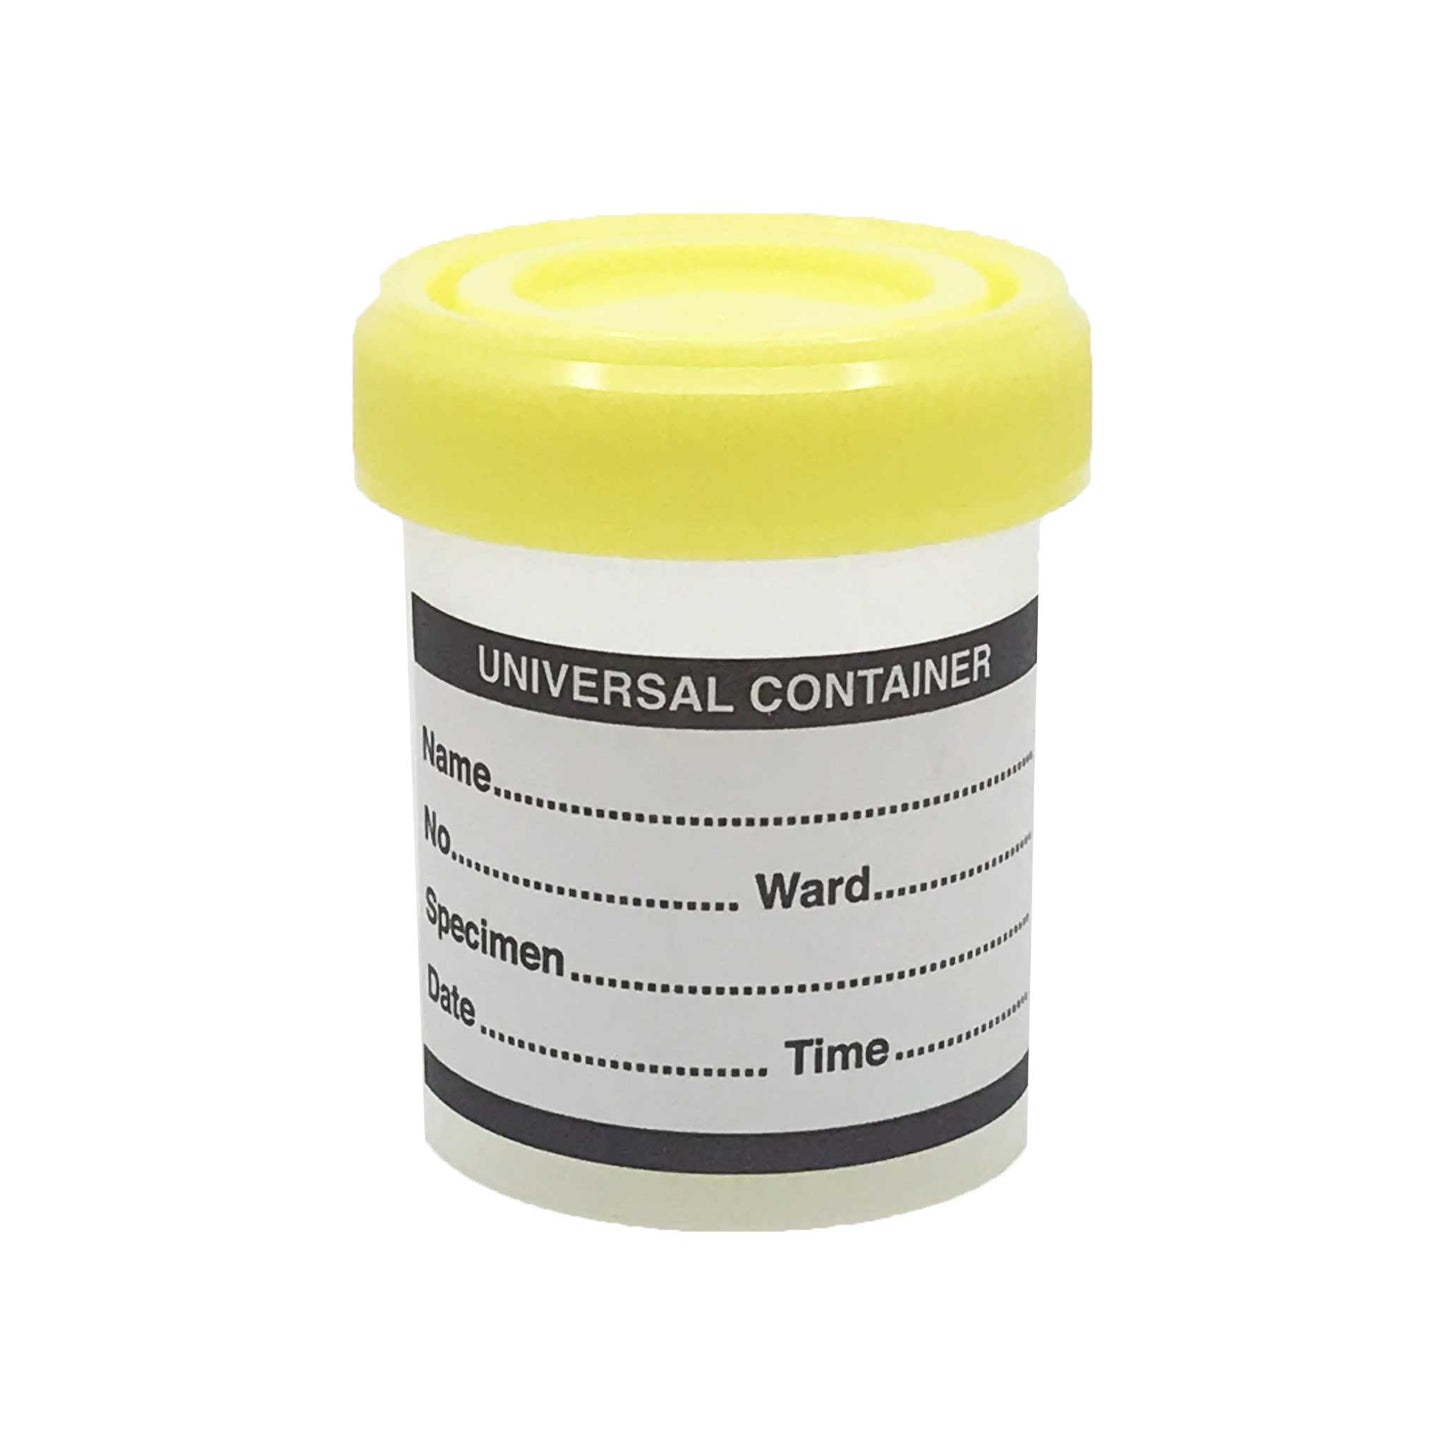 60ml Cups for Urine Drug Testing